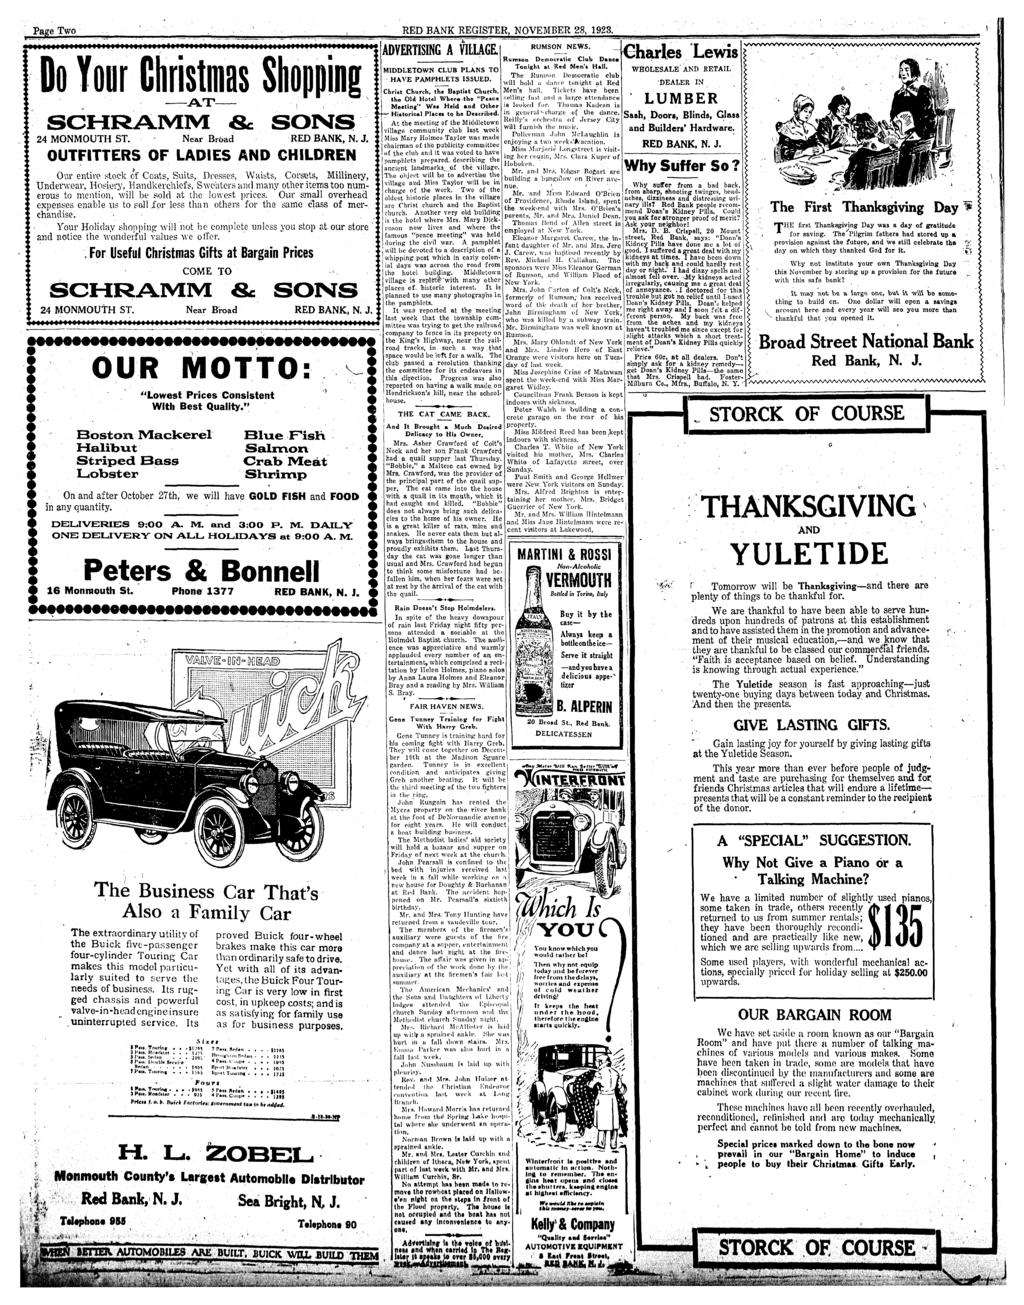 Page Two RED BANK REGSTER, NOVEMBER 28, 1923. Do Your Chrsmas Shoppng. AT... SCHRAMM & SONS 24 MONMOUTH ST. Near Broad RED BANK, N. J. OUTFTTERS OF LADES AND CHLDREN Our enre-sock of Coas, Sus,.